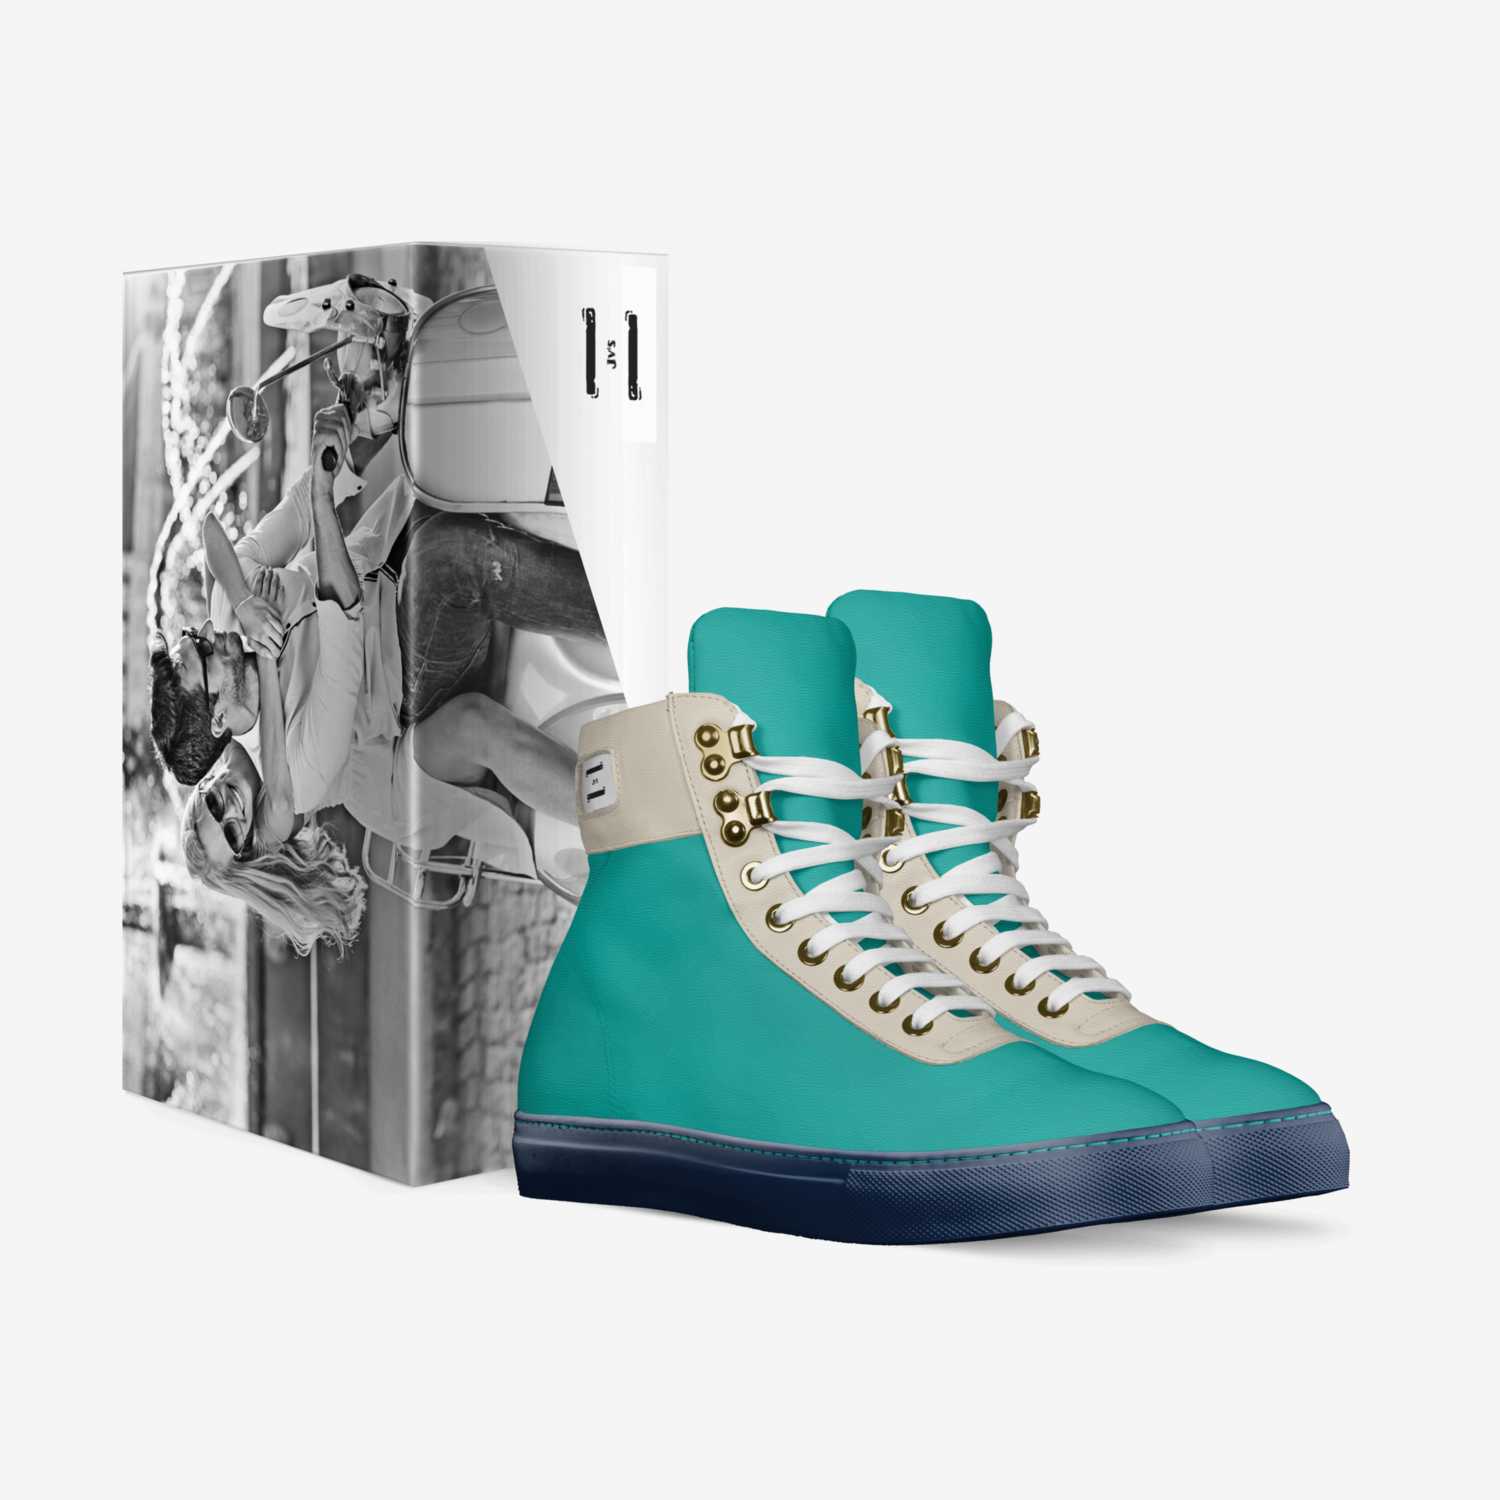 Jv's custom made in Italy shoes by Emily | Box view